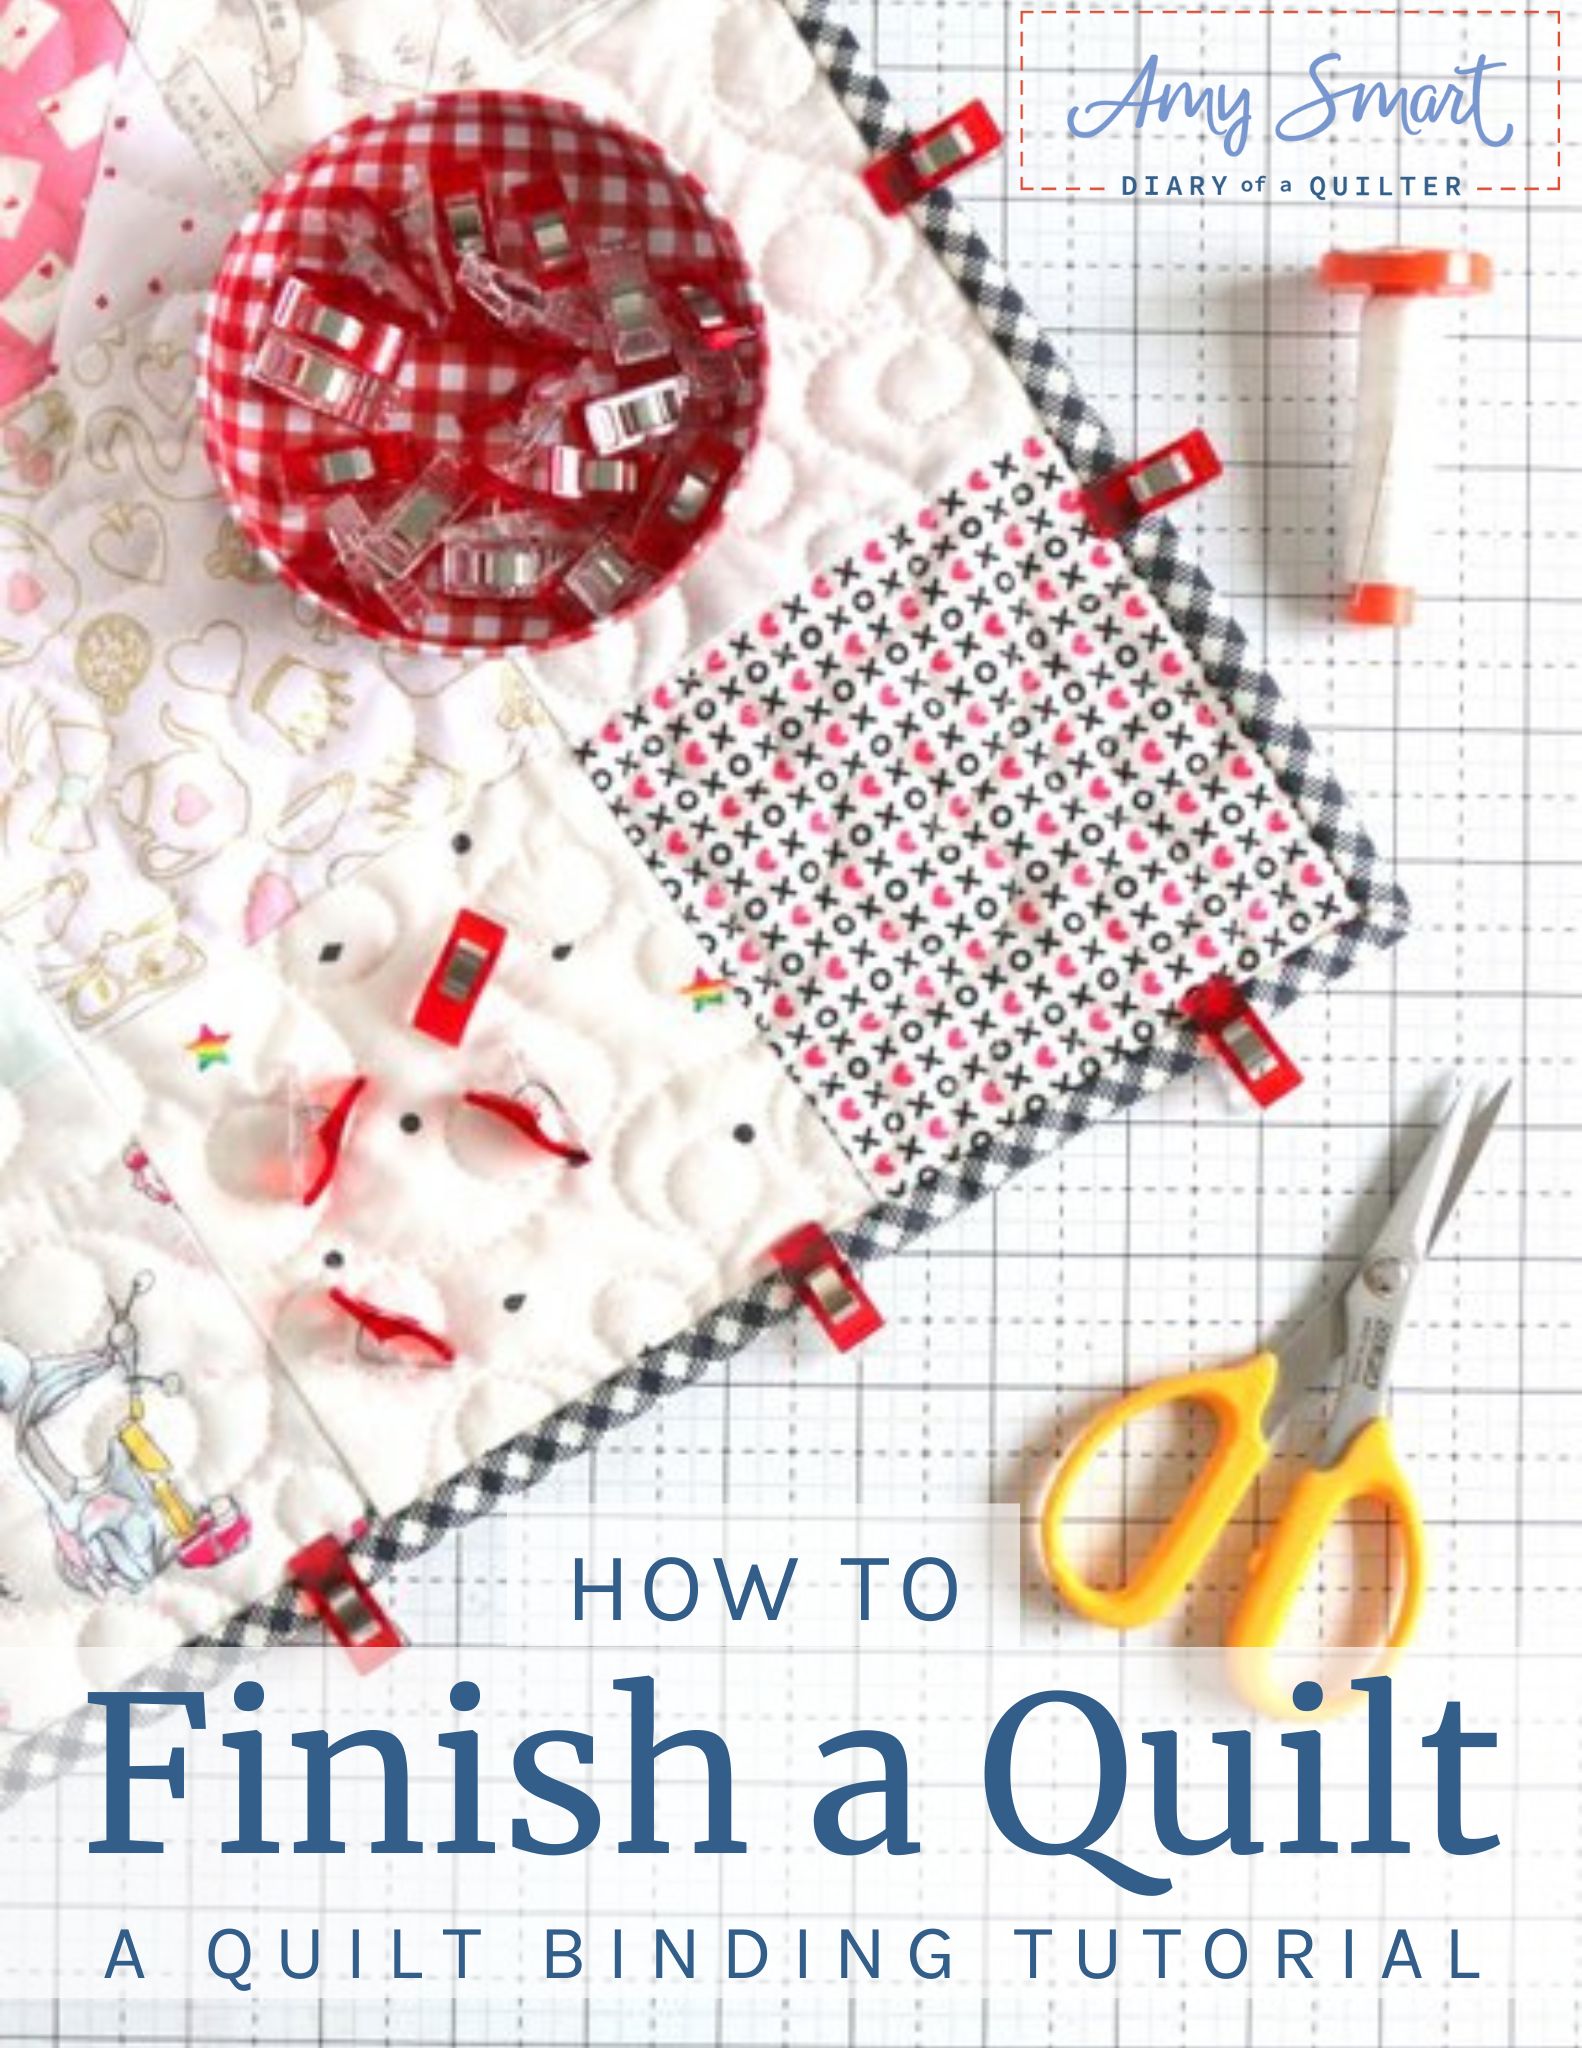 A Quilt Binding Tutorial- How to Finish a Quilt